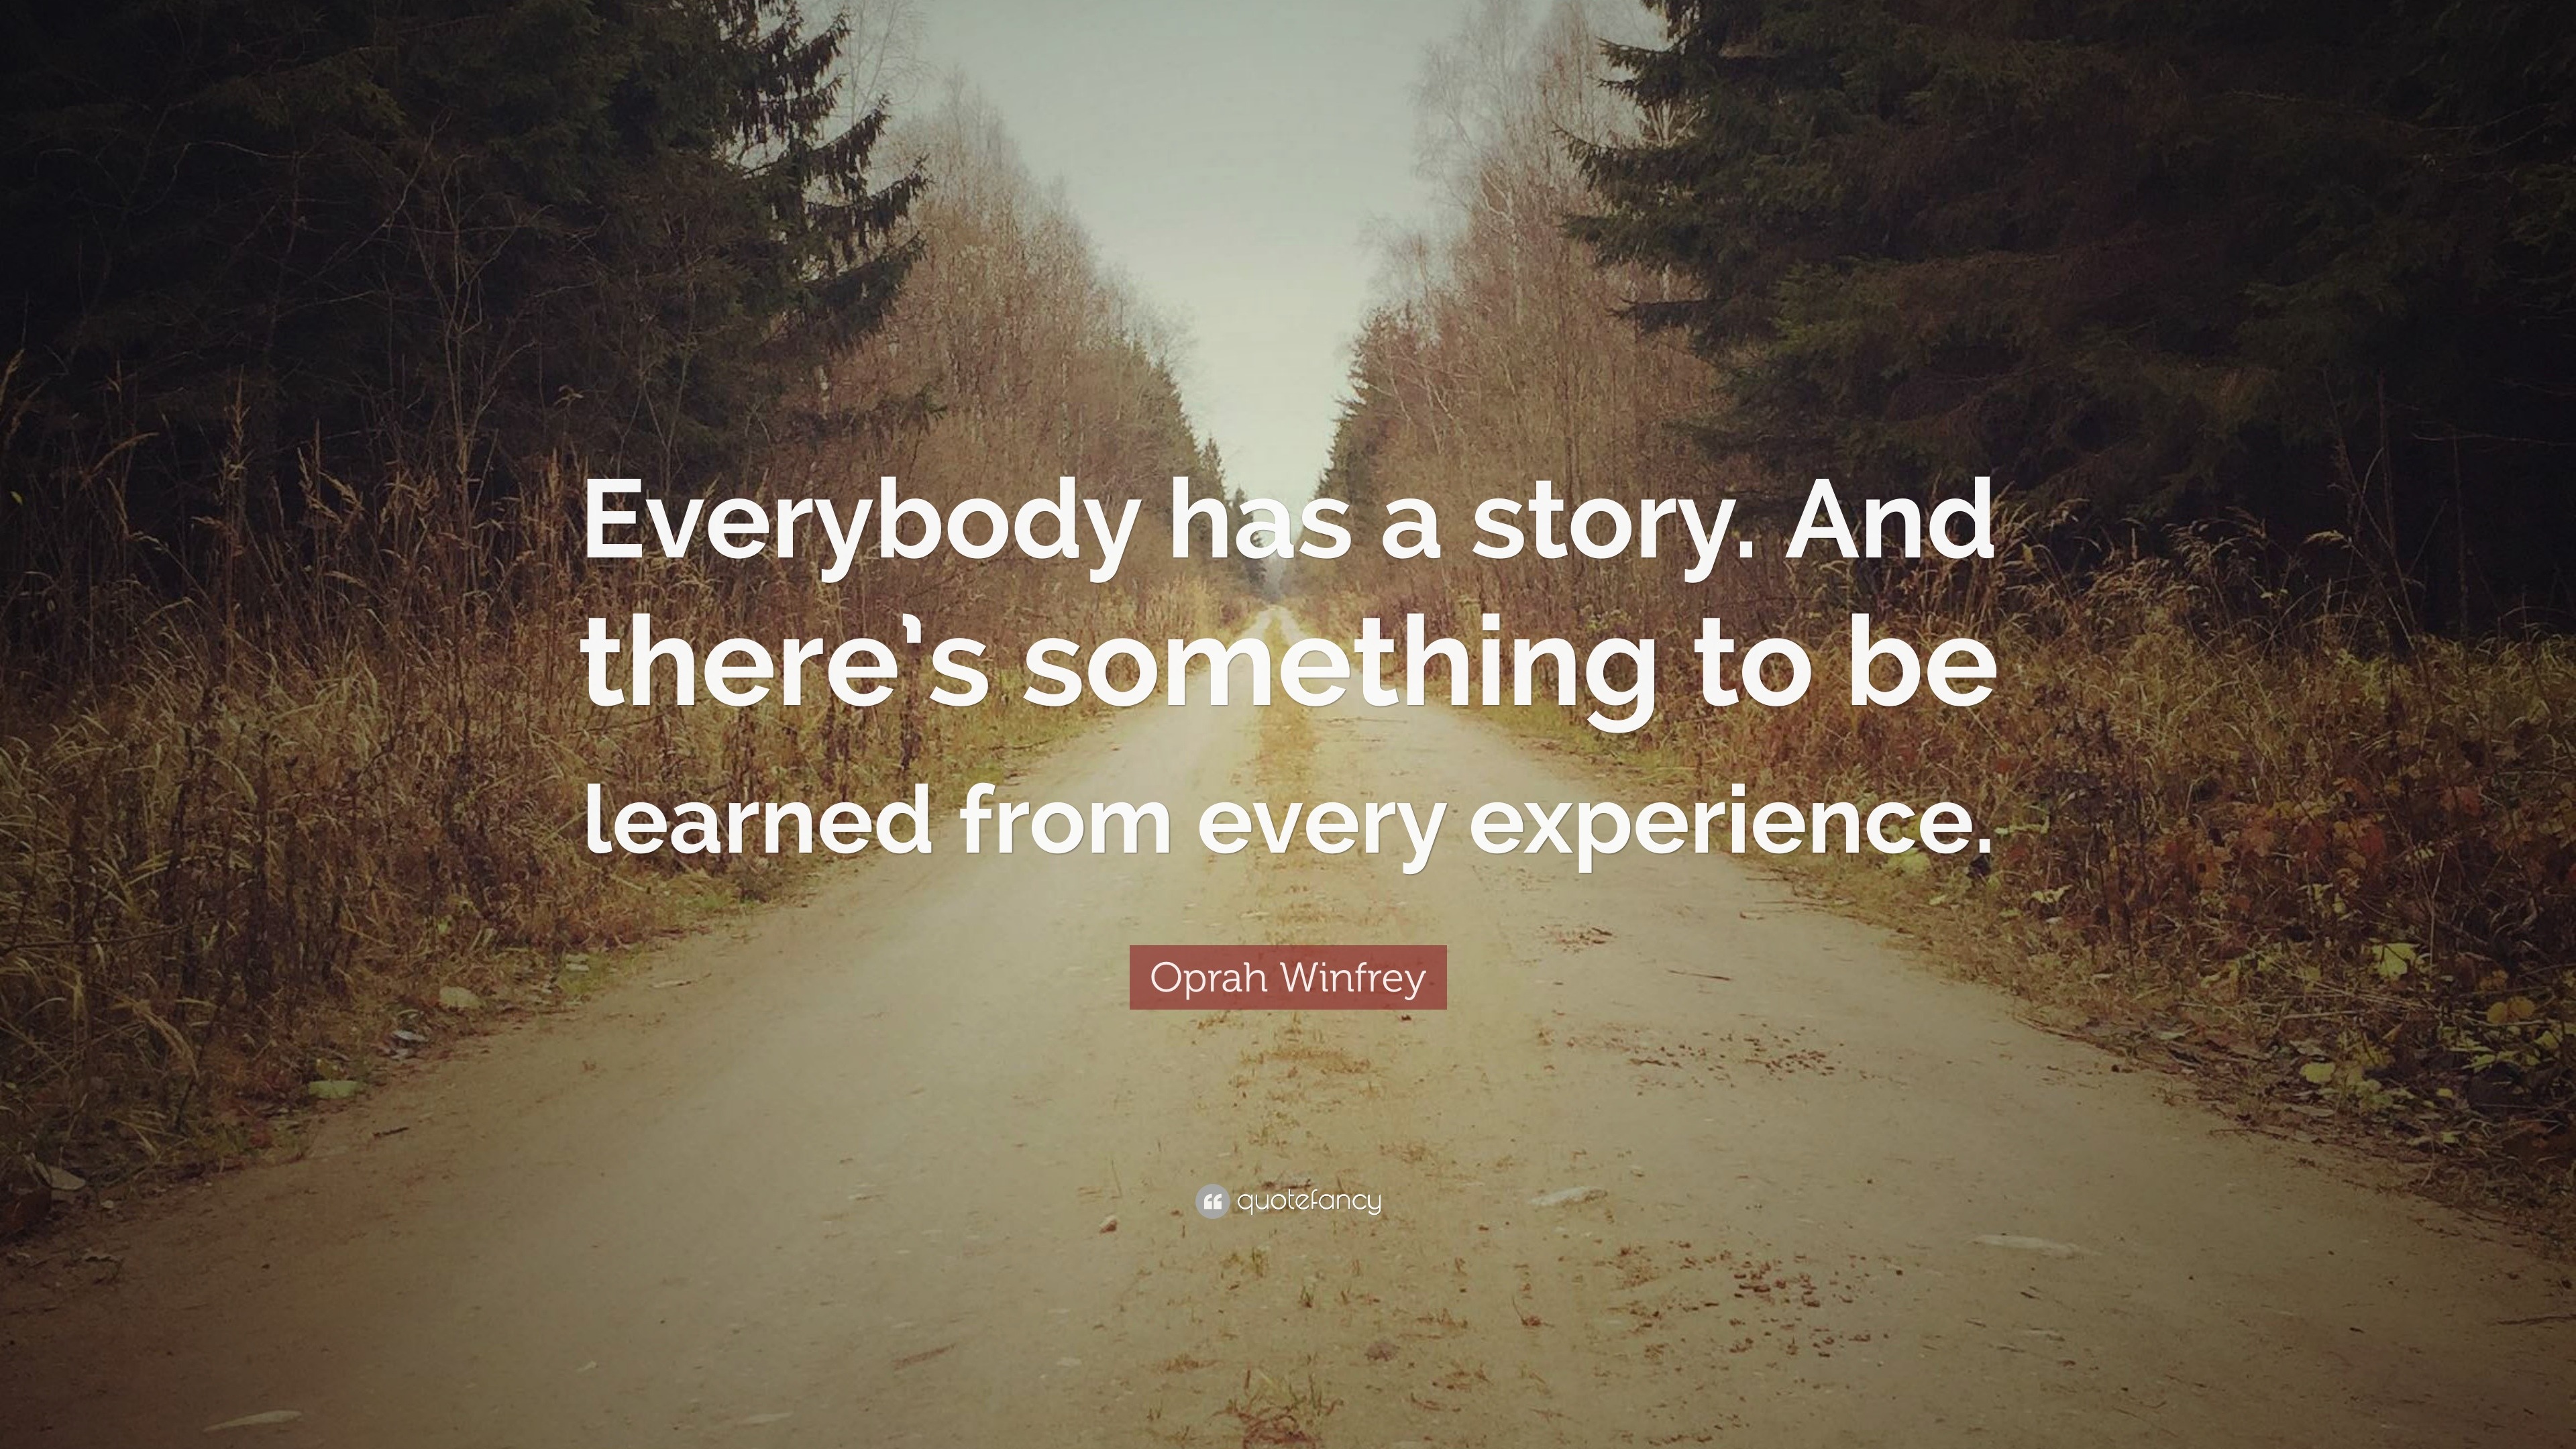 Oprah Winfrey Quote Everybody Has A Story And There S Something To Be Learned From Every Experience